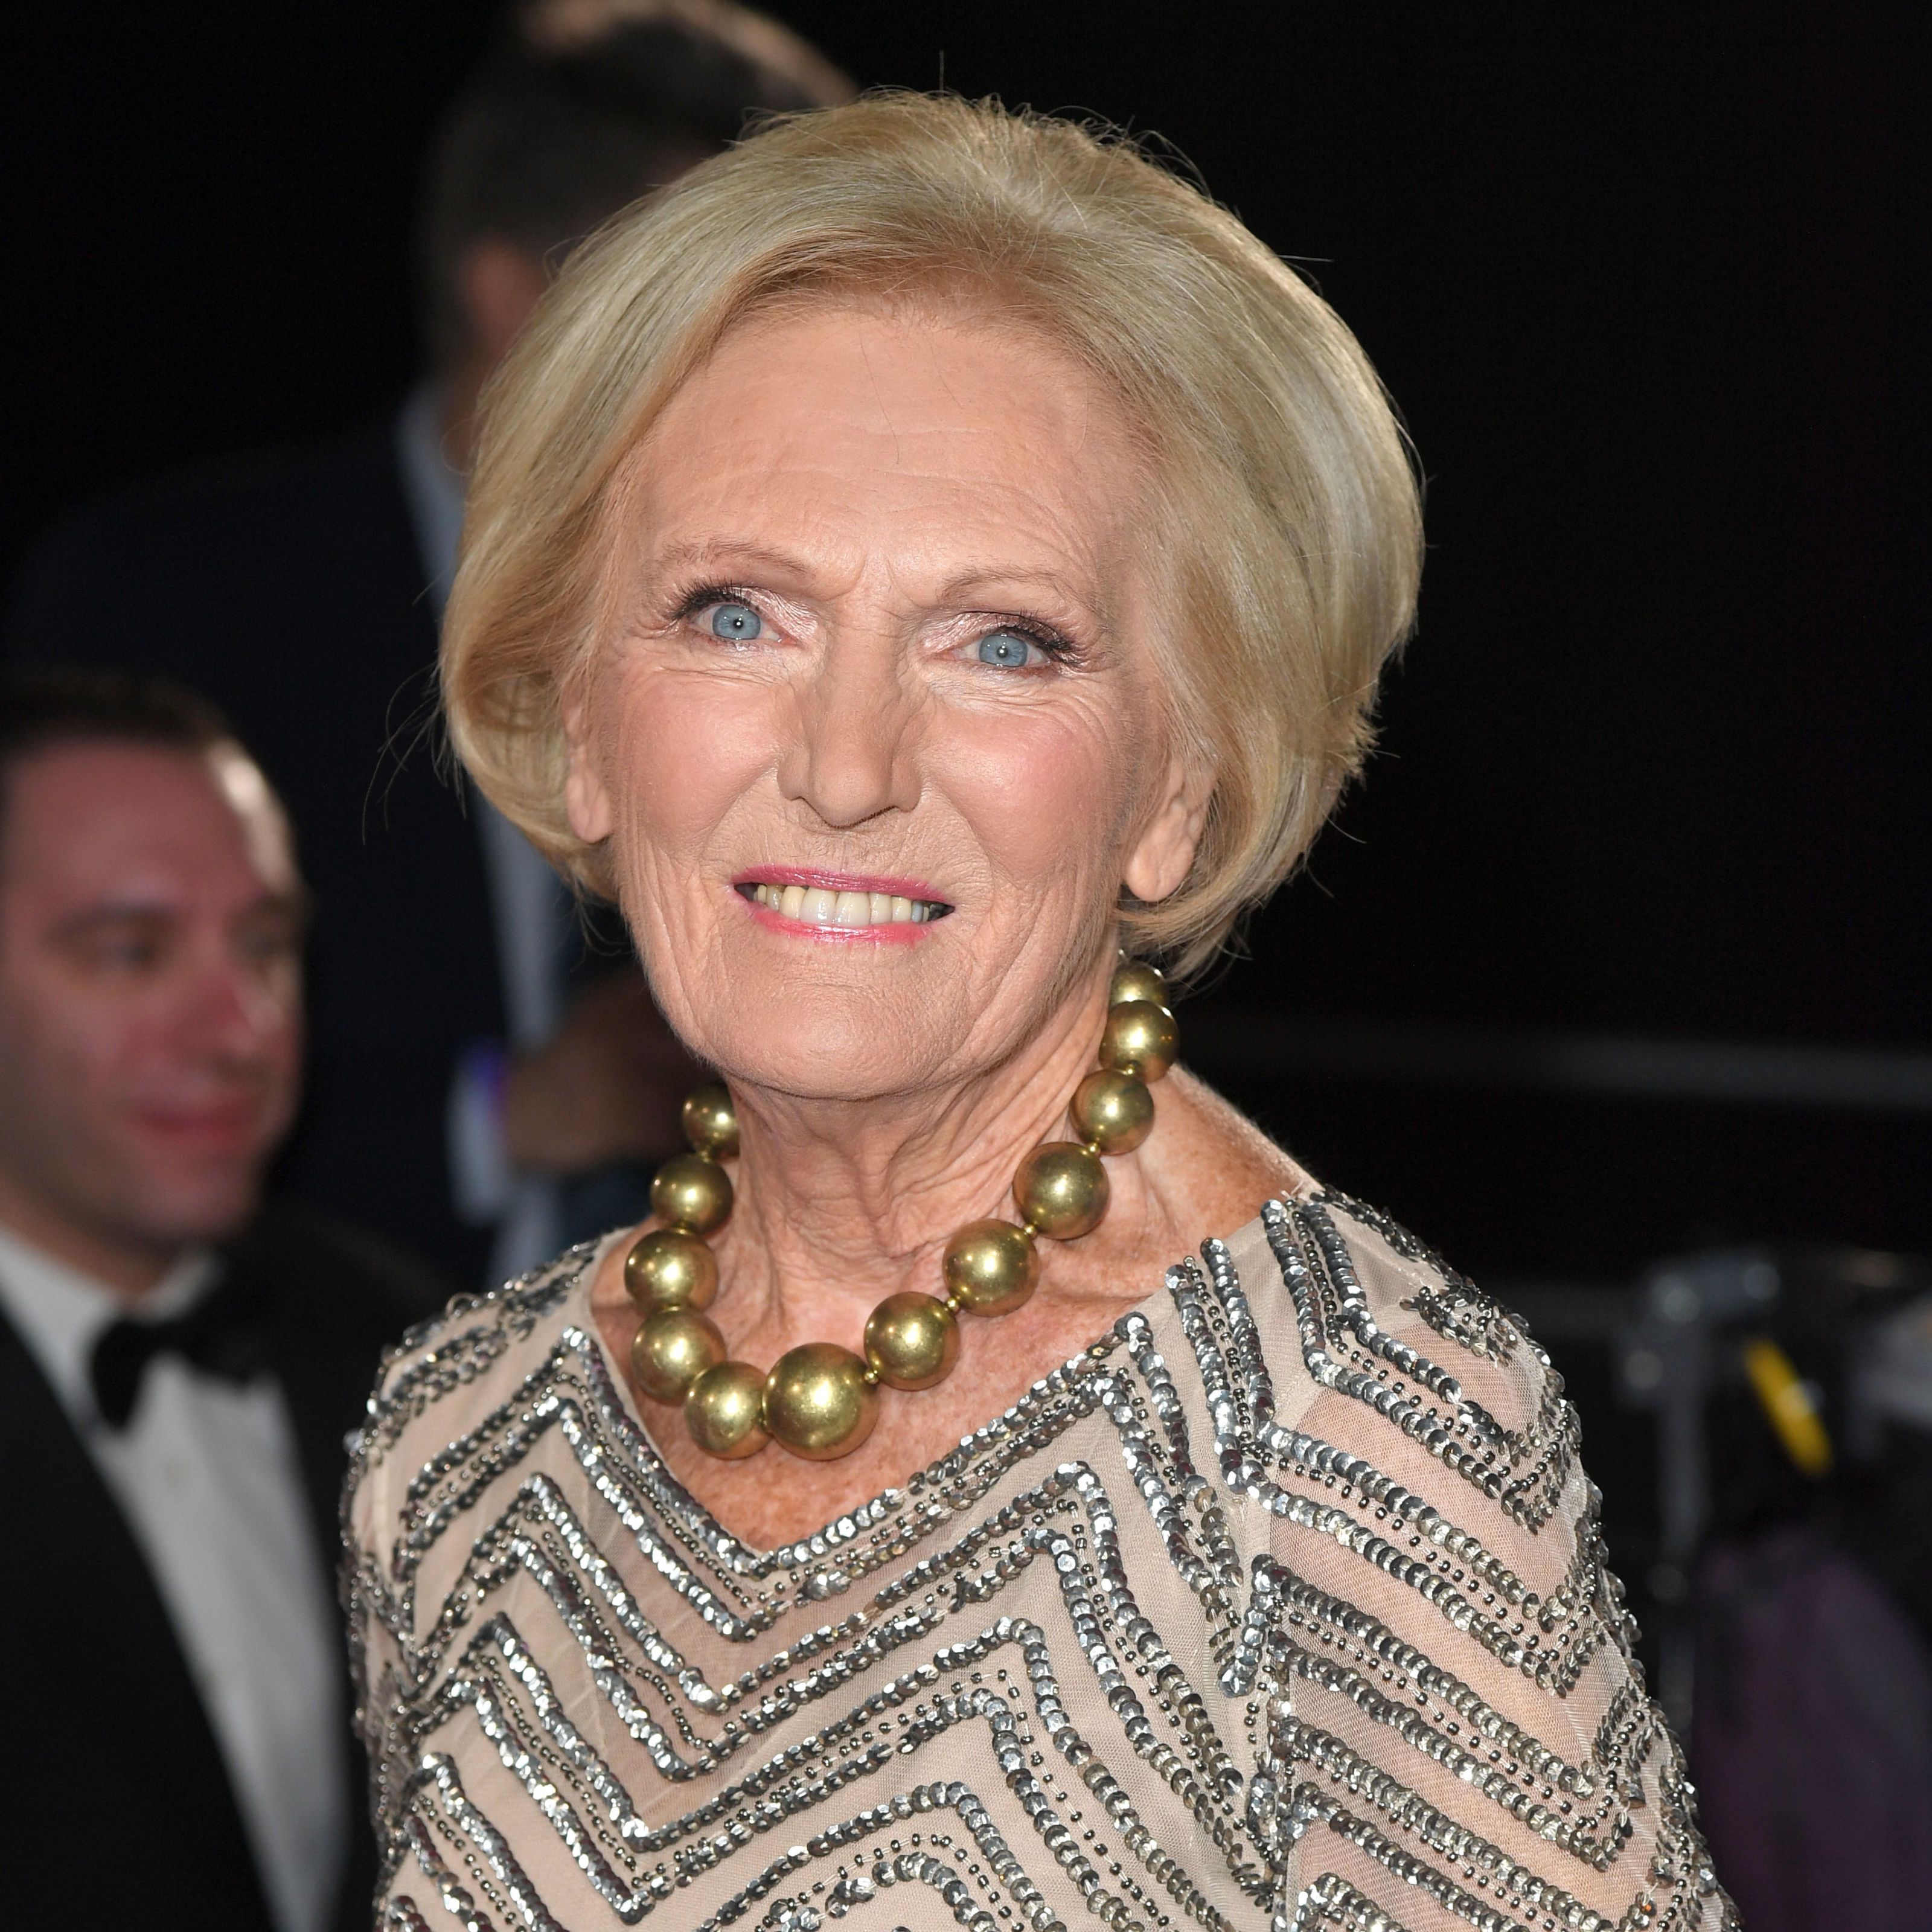 Mary Berry Holidays in December | News | WLIW